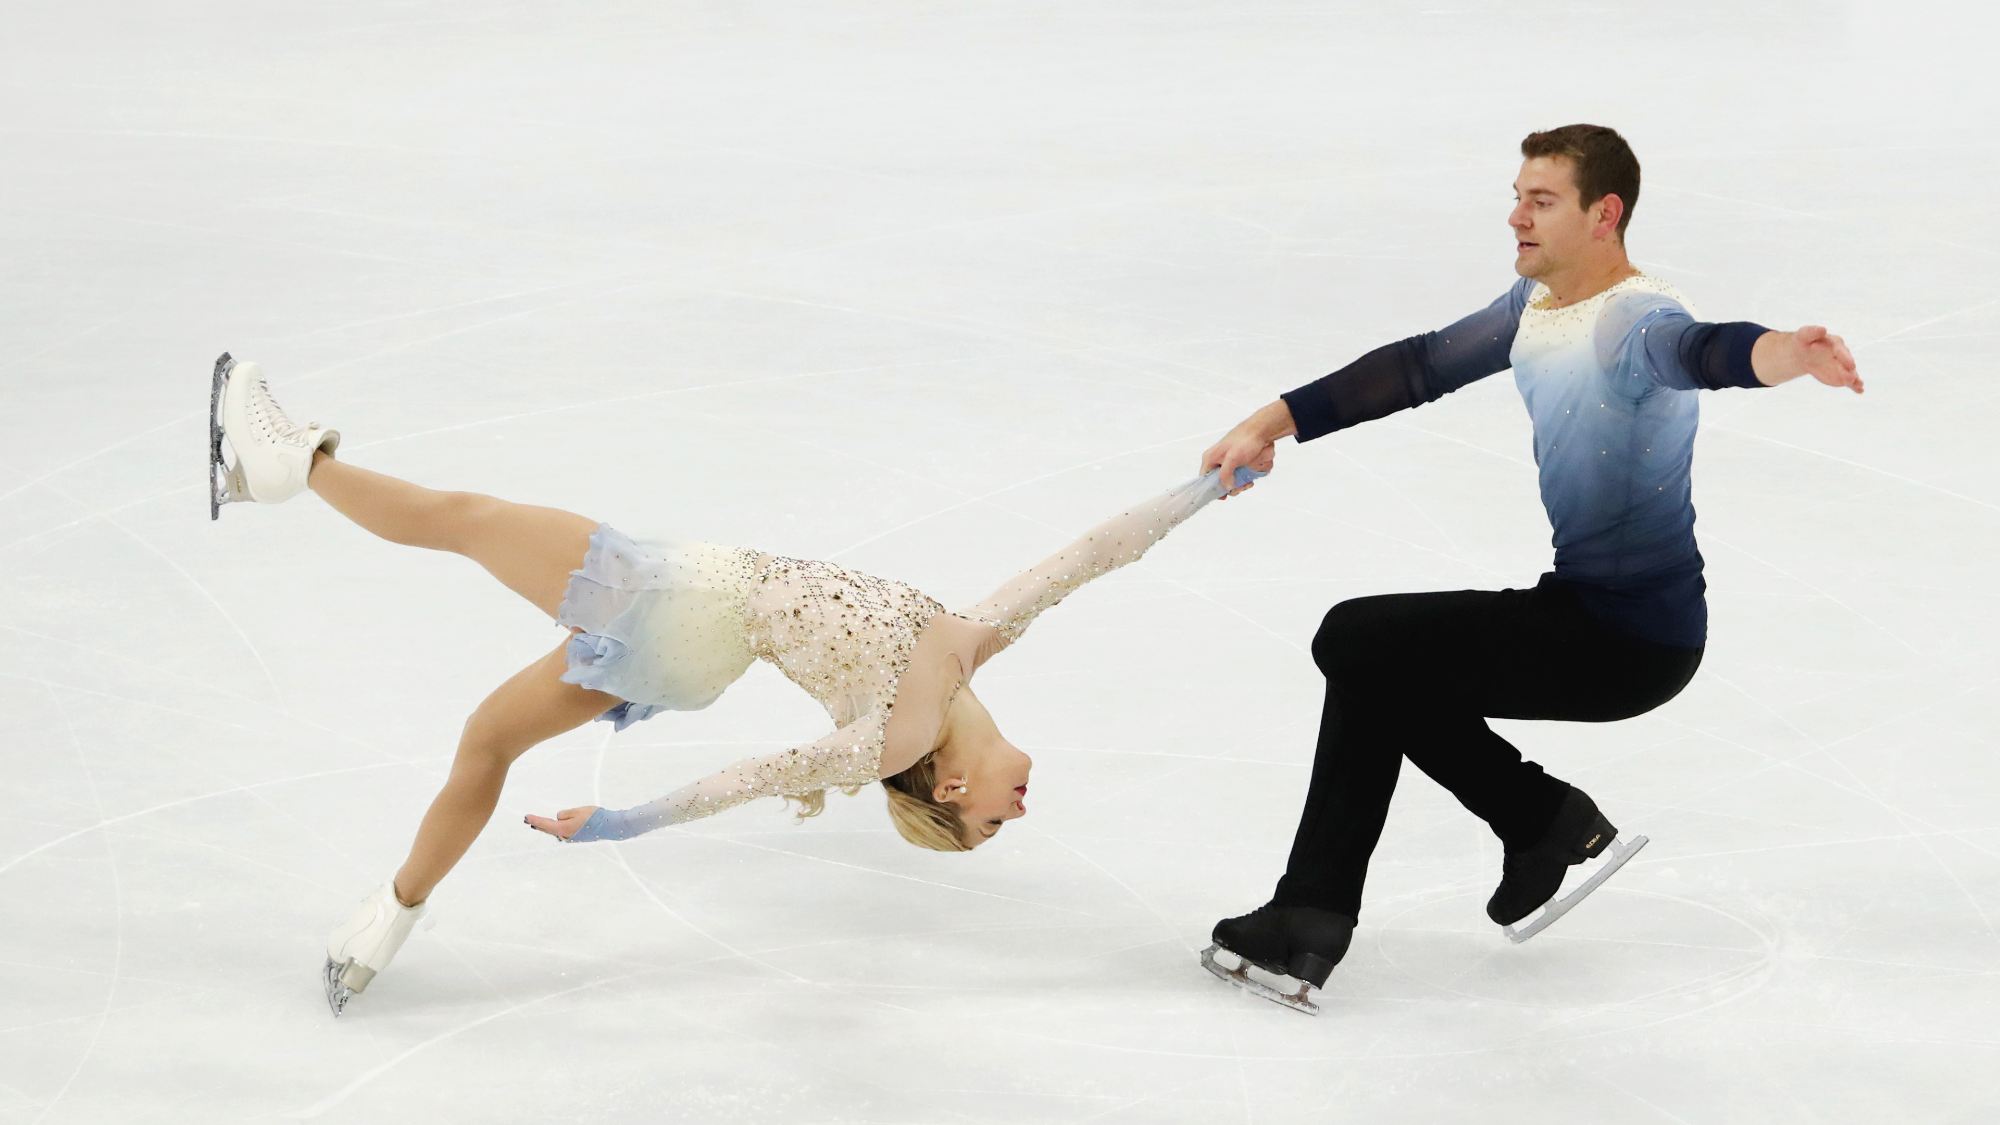 Ice Skating Schedule 2022 Winter Olympics 2022 Figure Skating: How To Watch, Events And Tv Schedule |  Tom's Guide